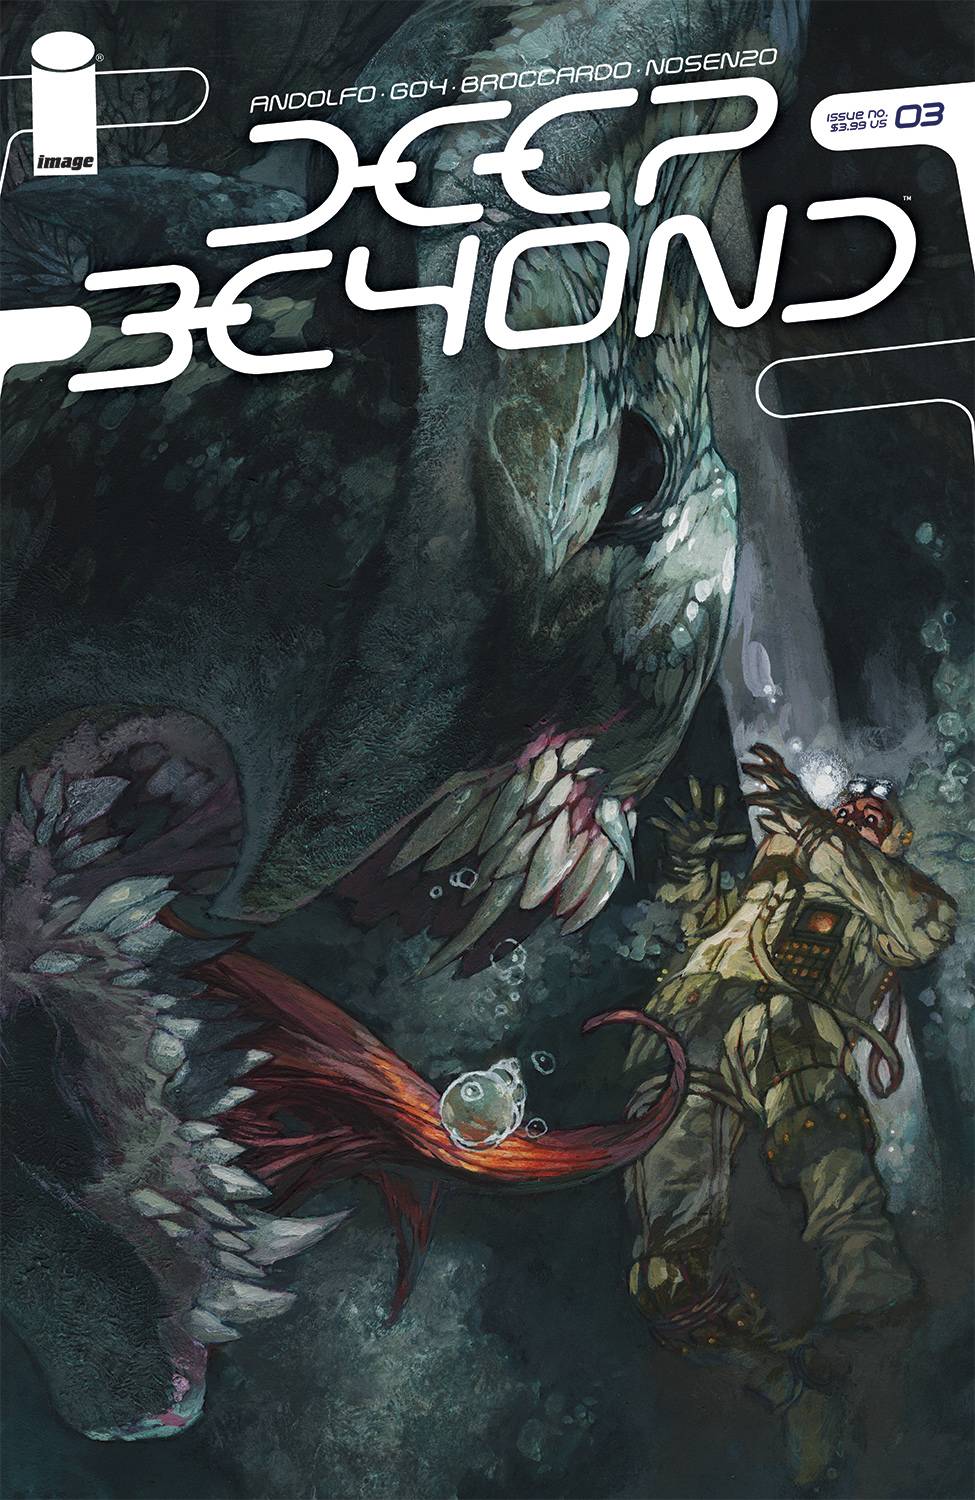 Deep Beyond #3 Cover D Bianchi (Of 12)